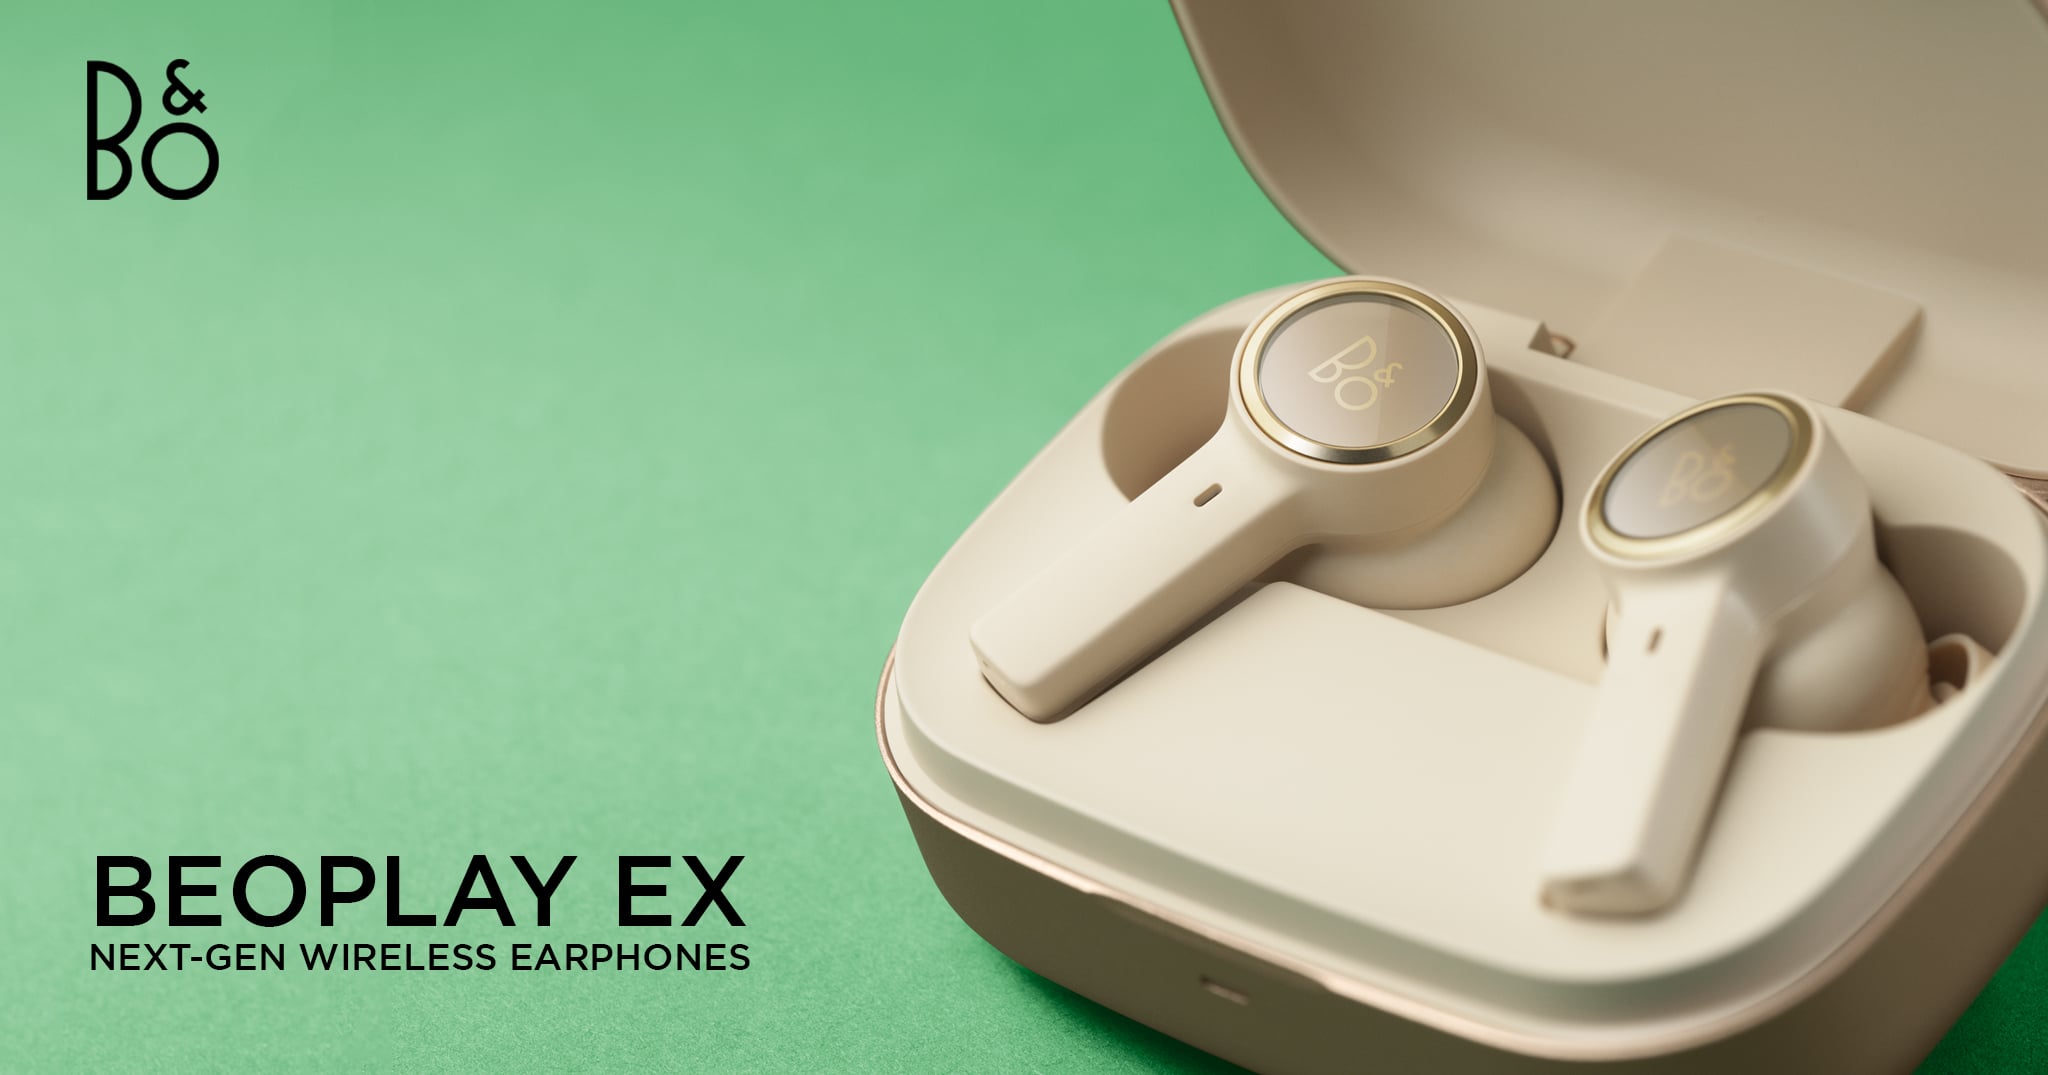 B&O BLP News cover Beoplay EX